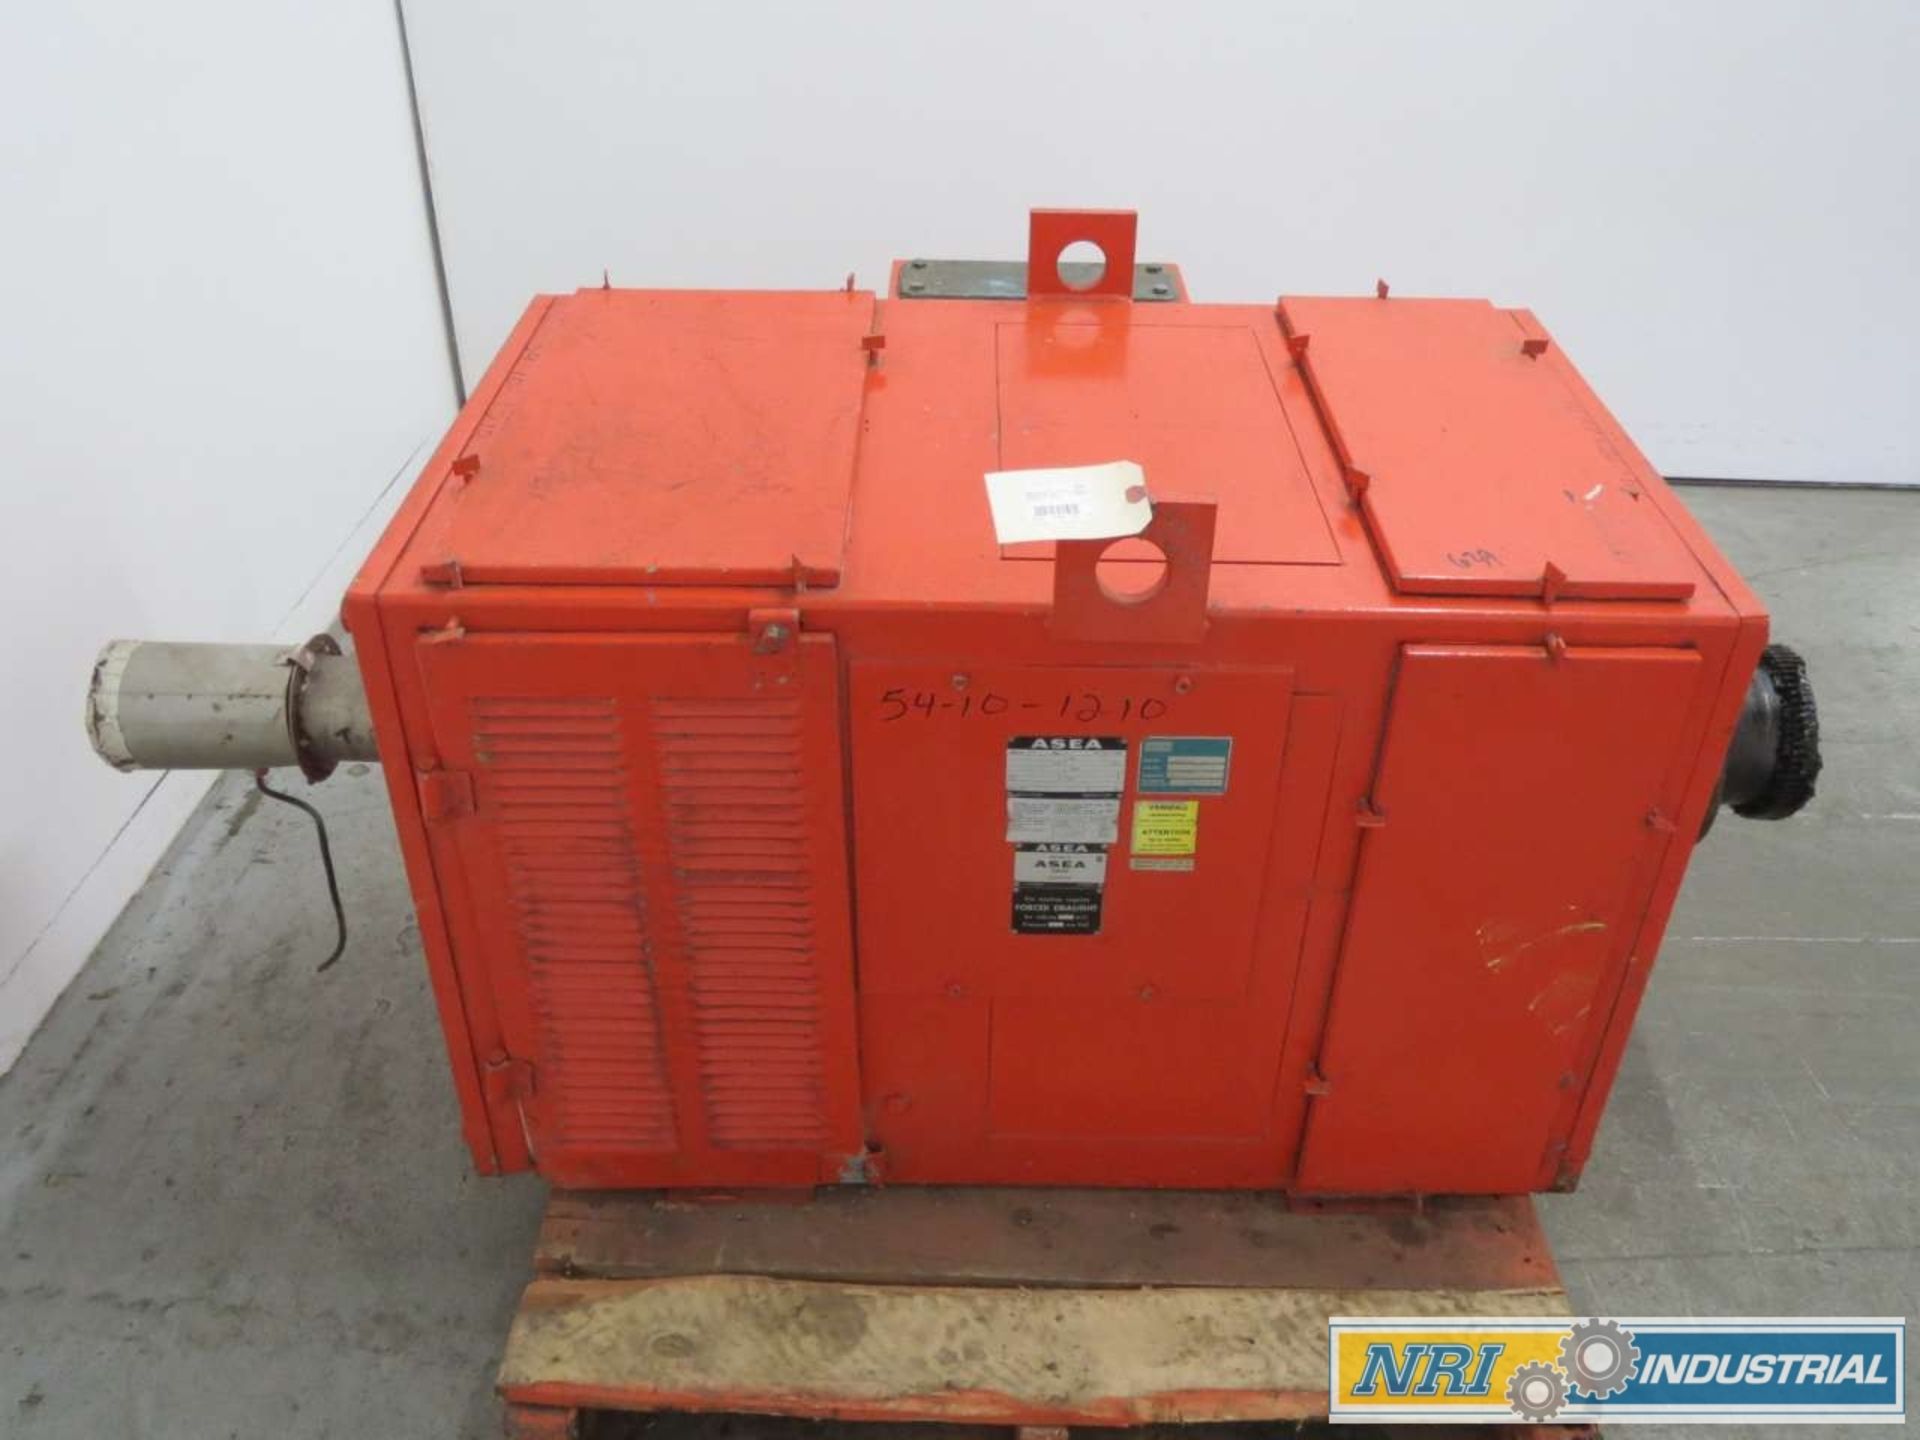 ASEA LAB 355 LA SIEMENS FORCED DRAUGHT 94KW 285V-DC 440-1852RPM DC ELECTRIC MOTOR